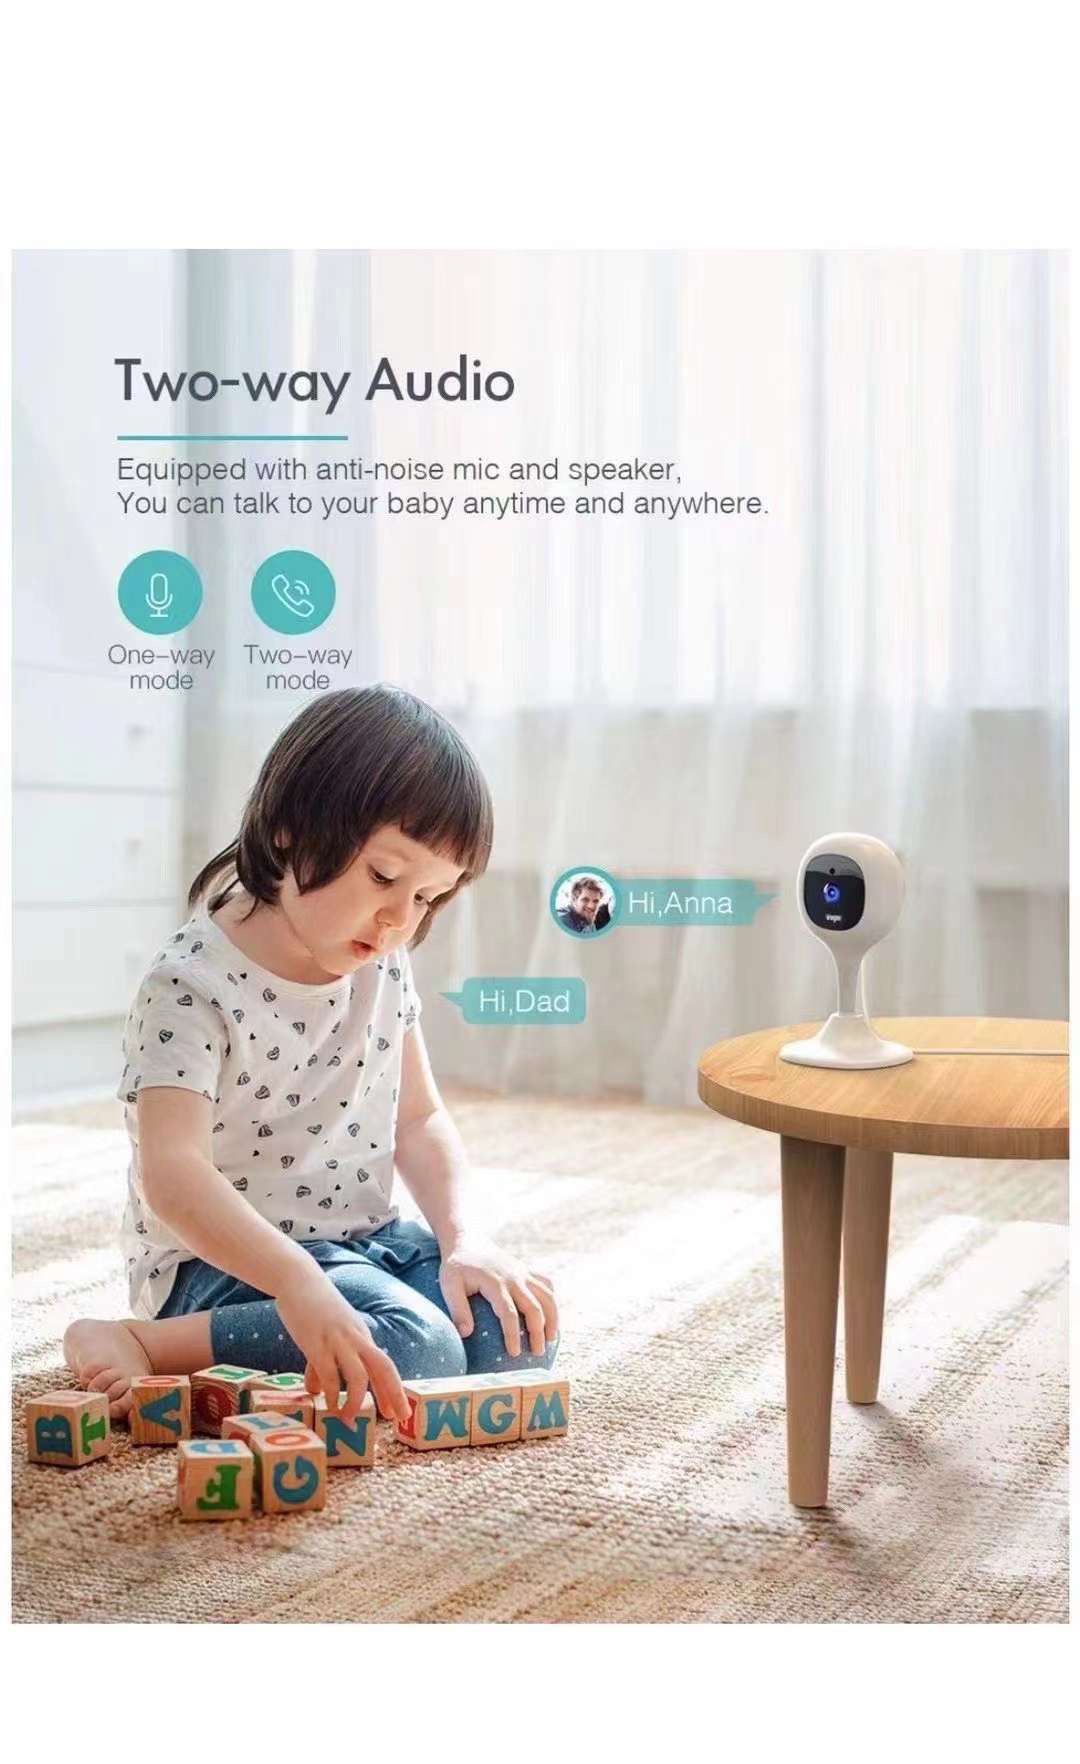 Security Camera Indoor, 1080P WiFi Camera for Baby/Pet/Nanny Motion Detection, Night Vision, Two-Way Audio, Compatible with Alexa/Cloud Service